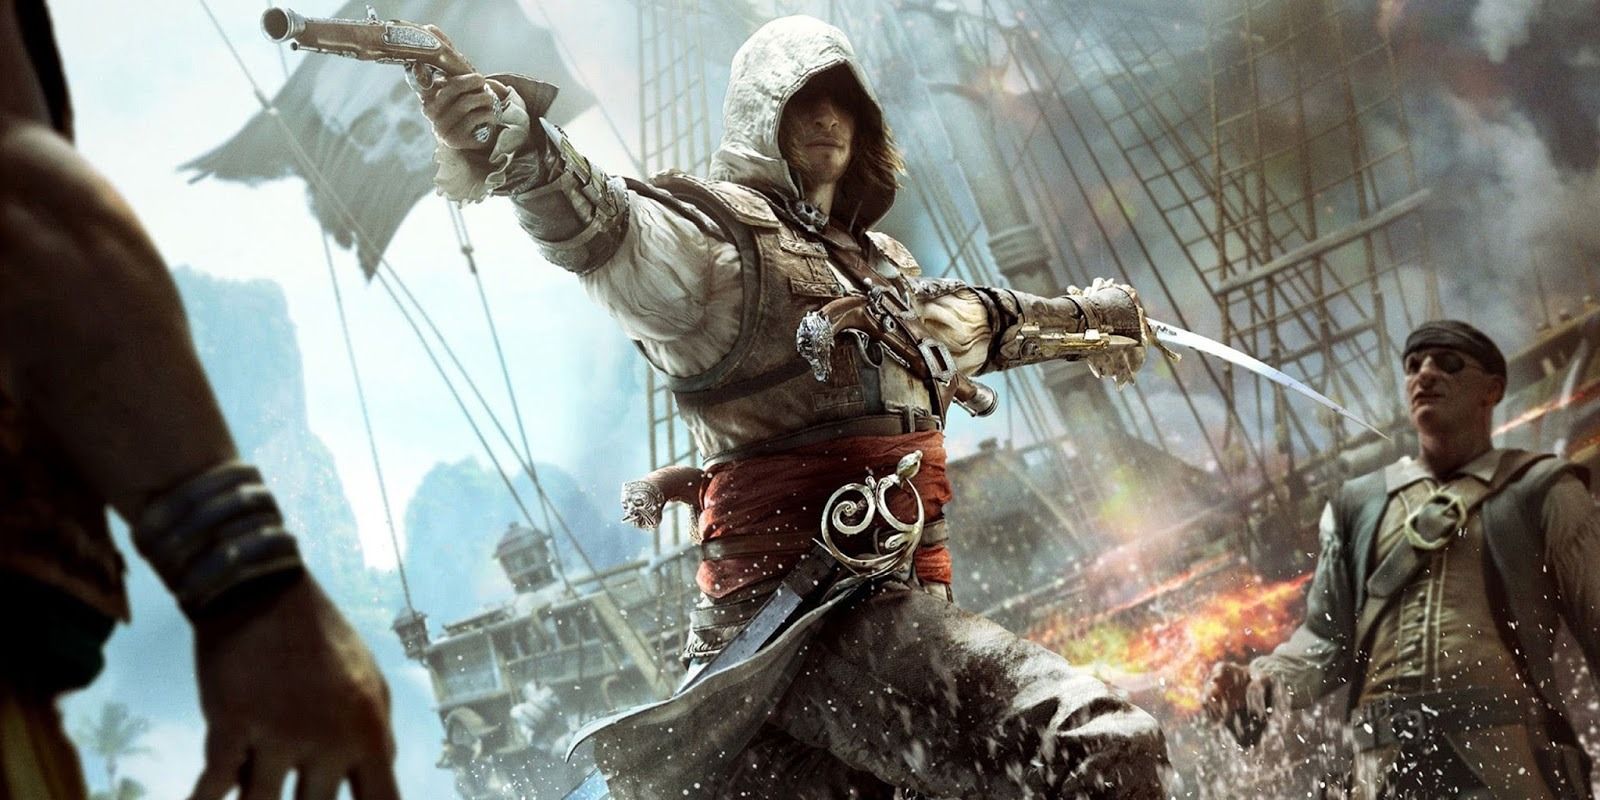 Edward Kenway from Assassin's Creed: Black Flag, holding two enemies at bay on either side of him by pointing a flintlock pistol at one and a saber at the other.